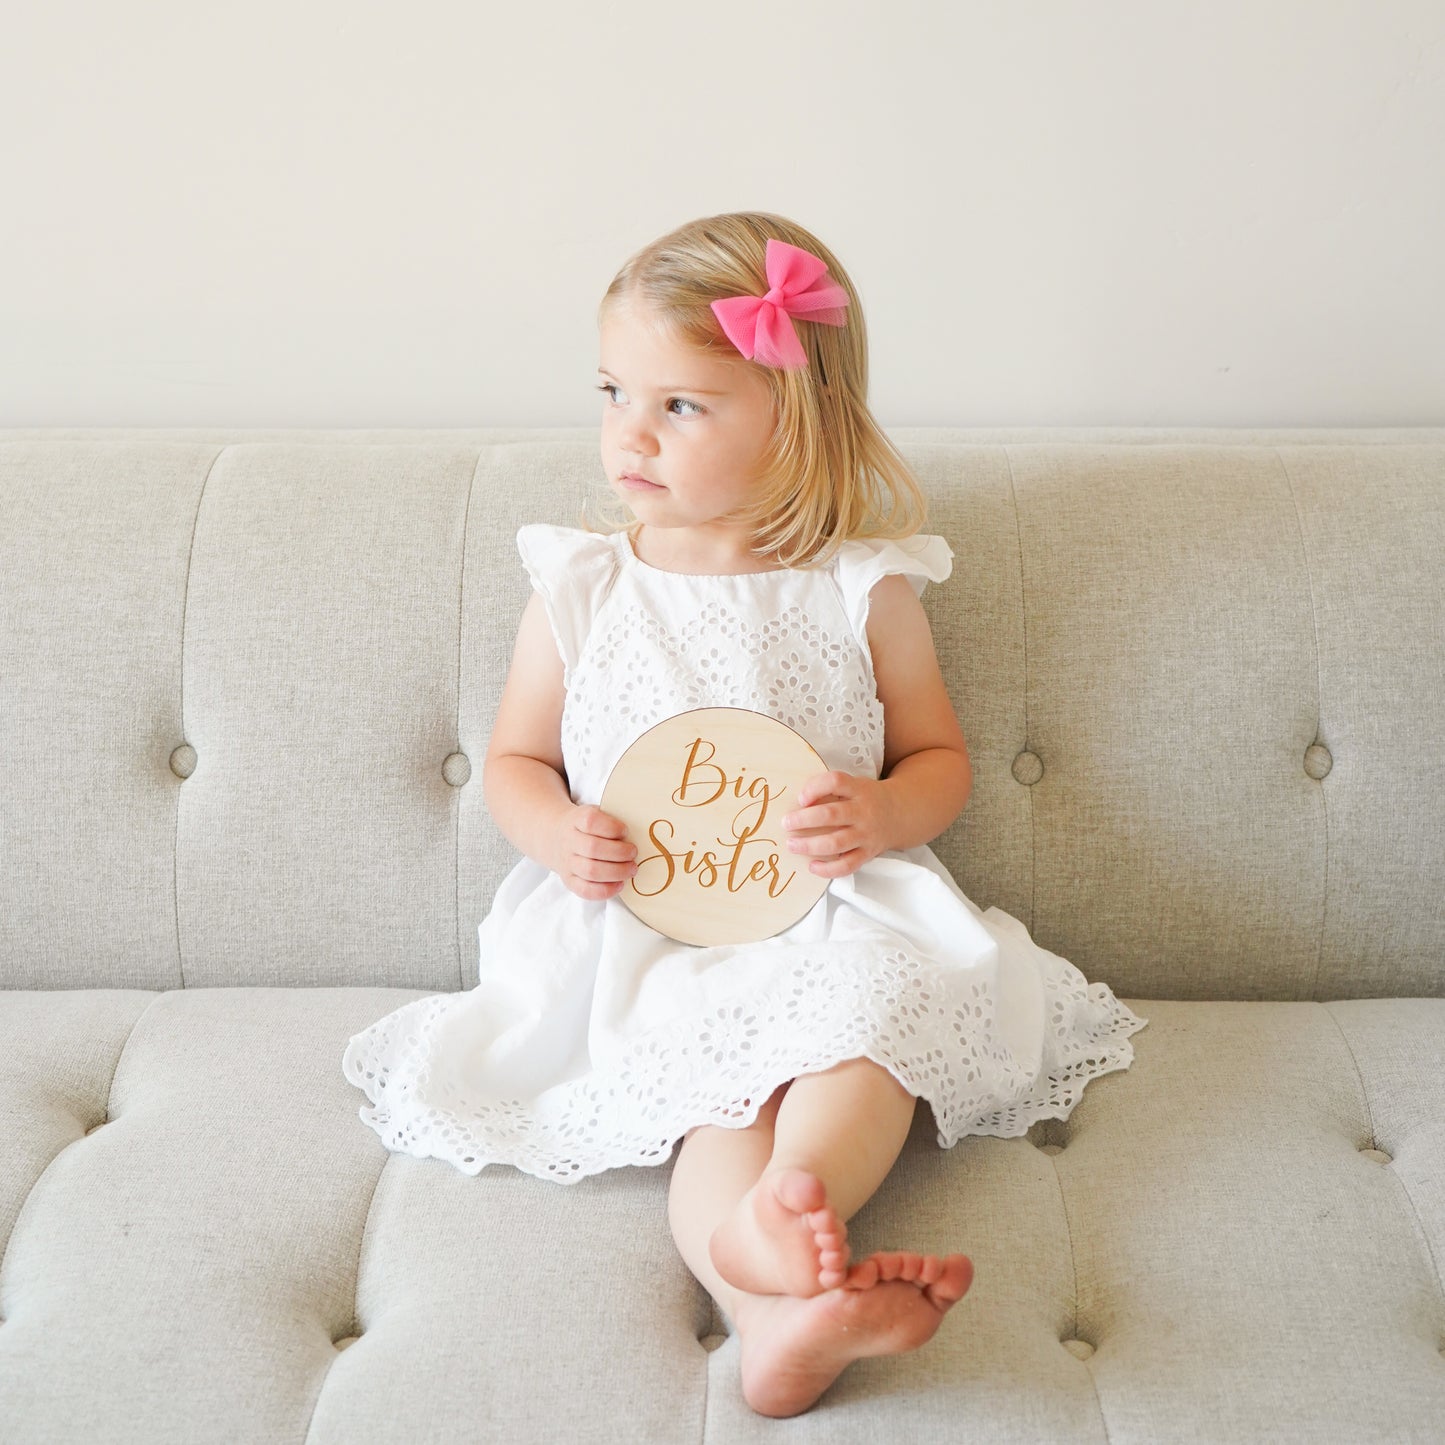 Ballet Bow for Babies and Big Girls: Josie